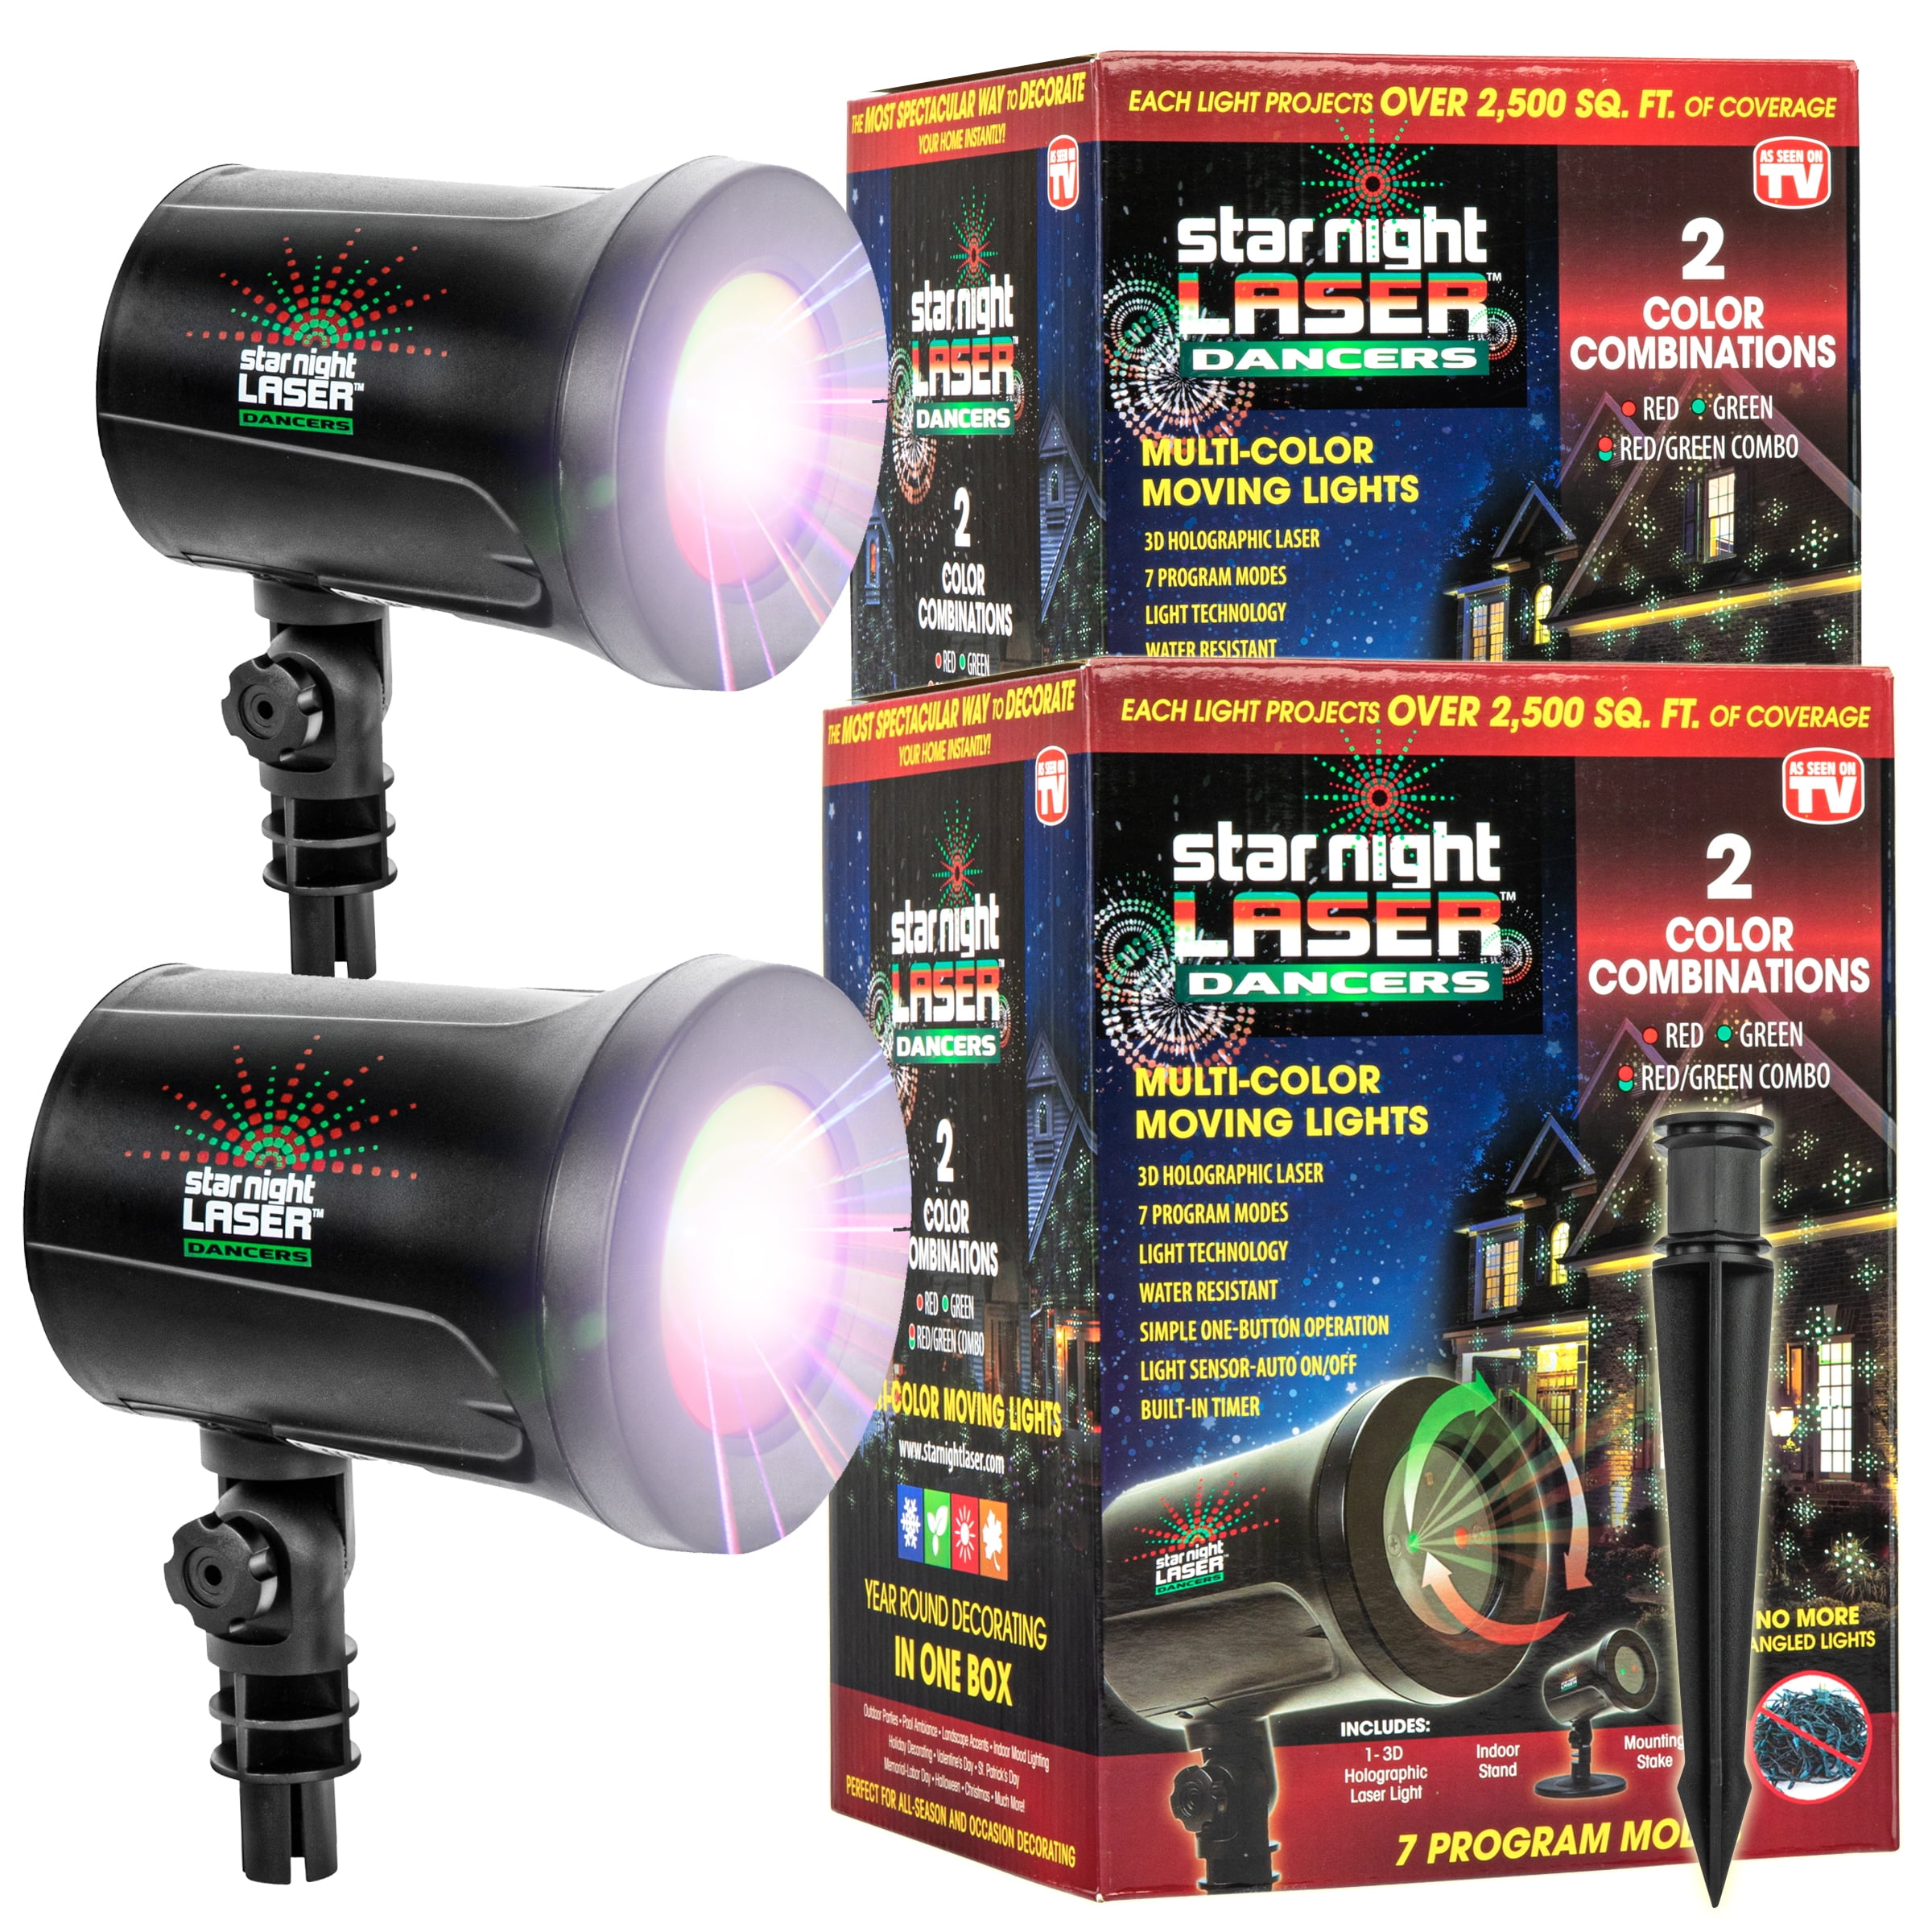 reductor angivet Forebyggelse Star Night Projector Laser Dancing Lights Projector with 7 Program Modes  and a Built-In Timer Weatherproof As Seen On TV- 2 Packs - Walmart.com